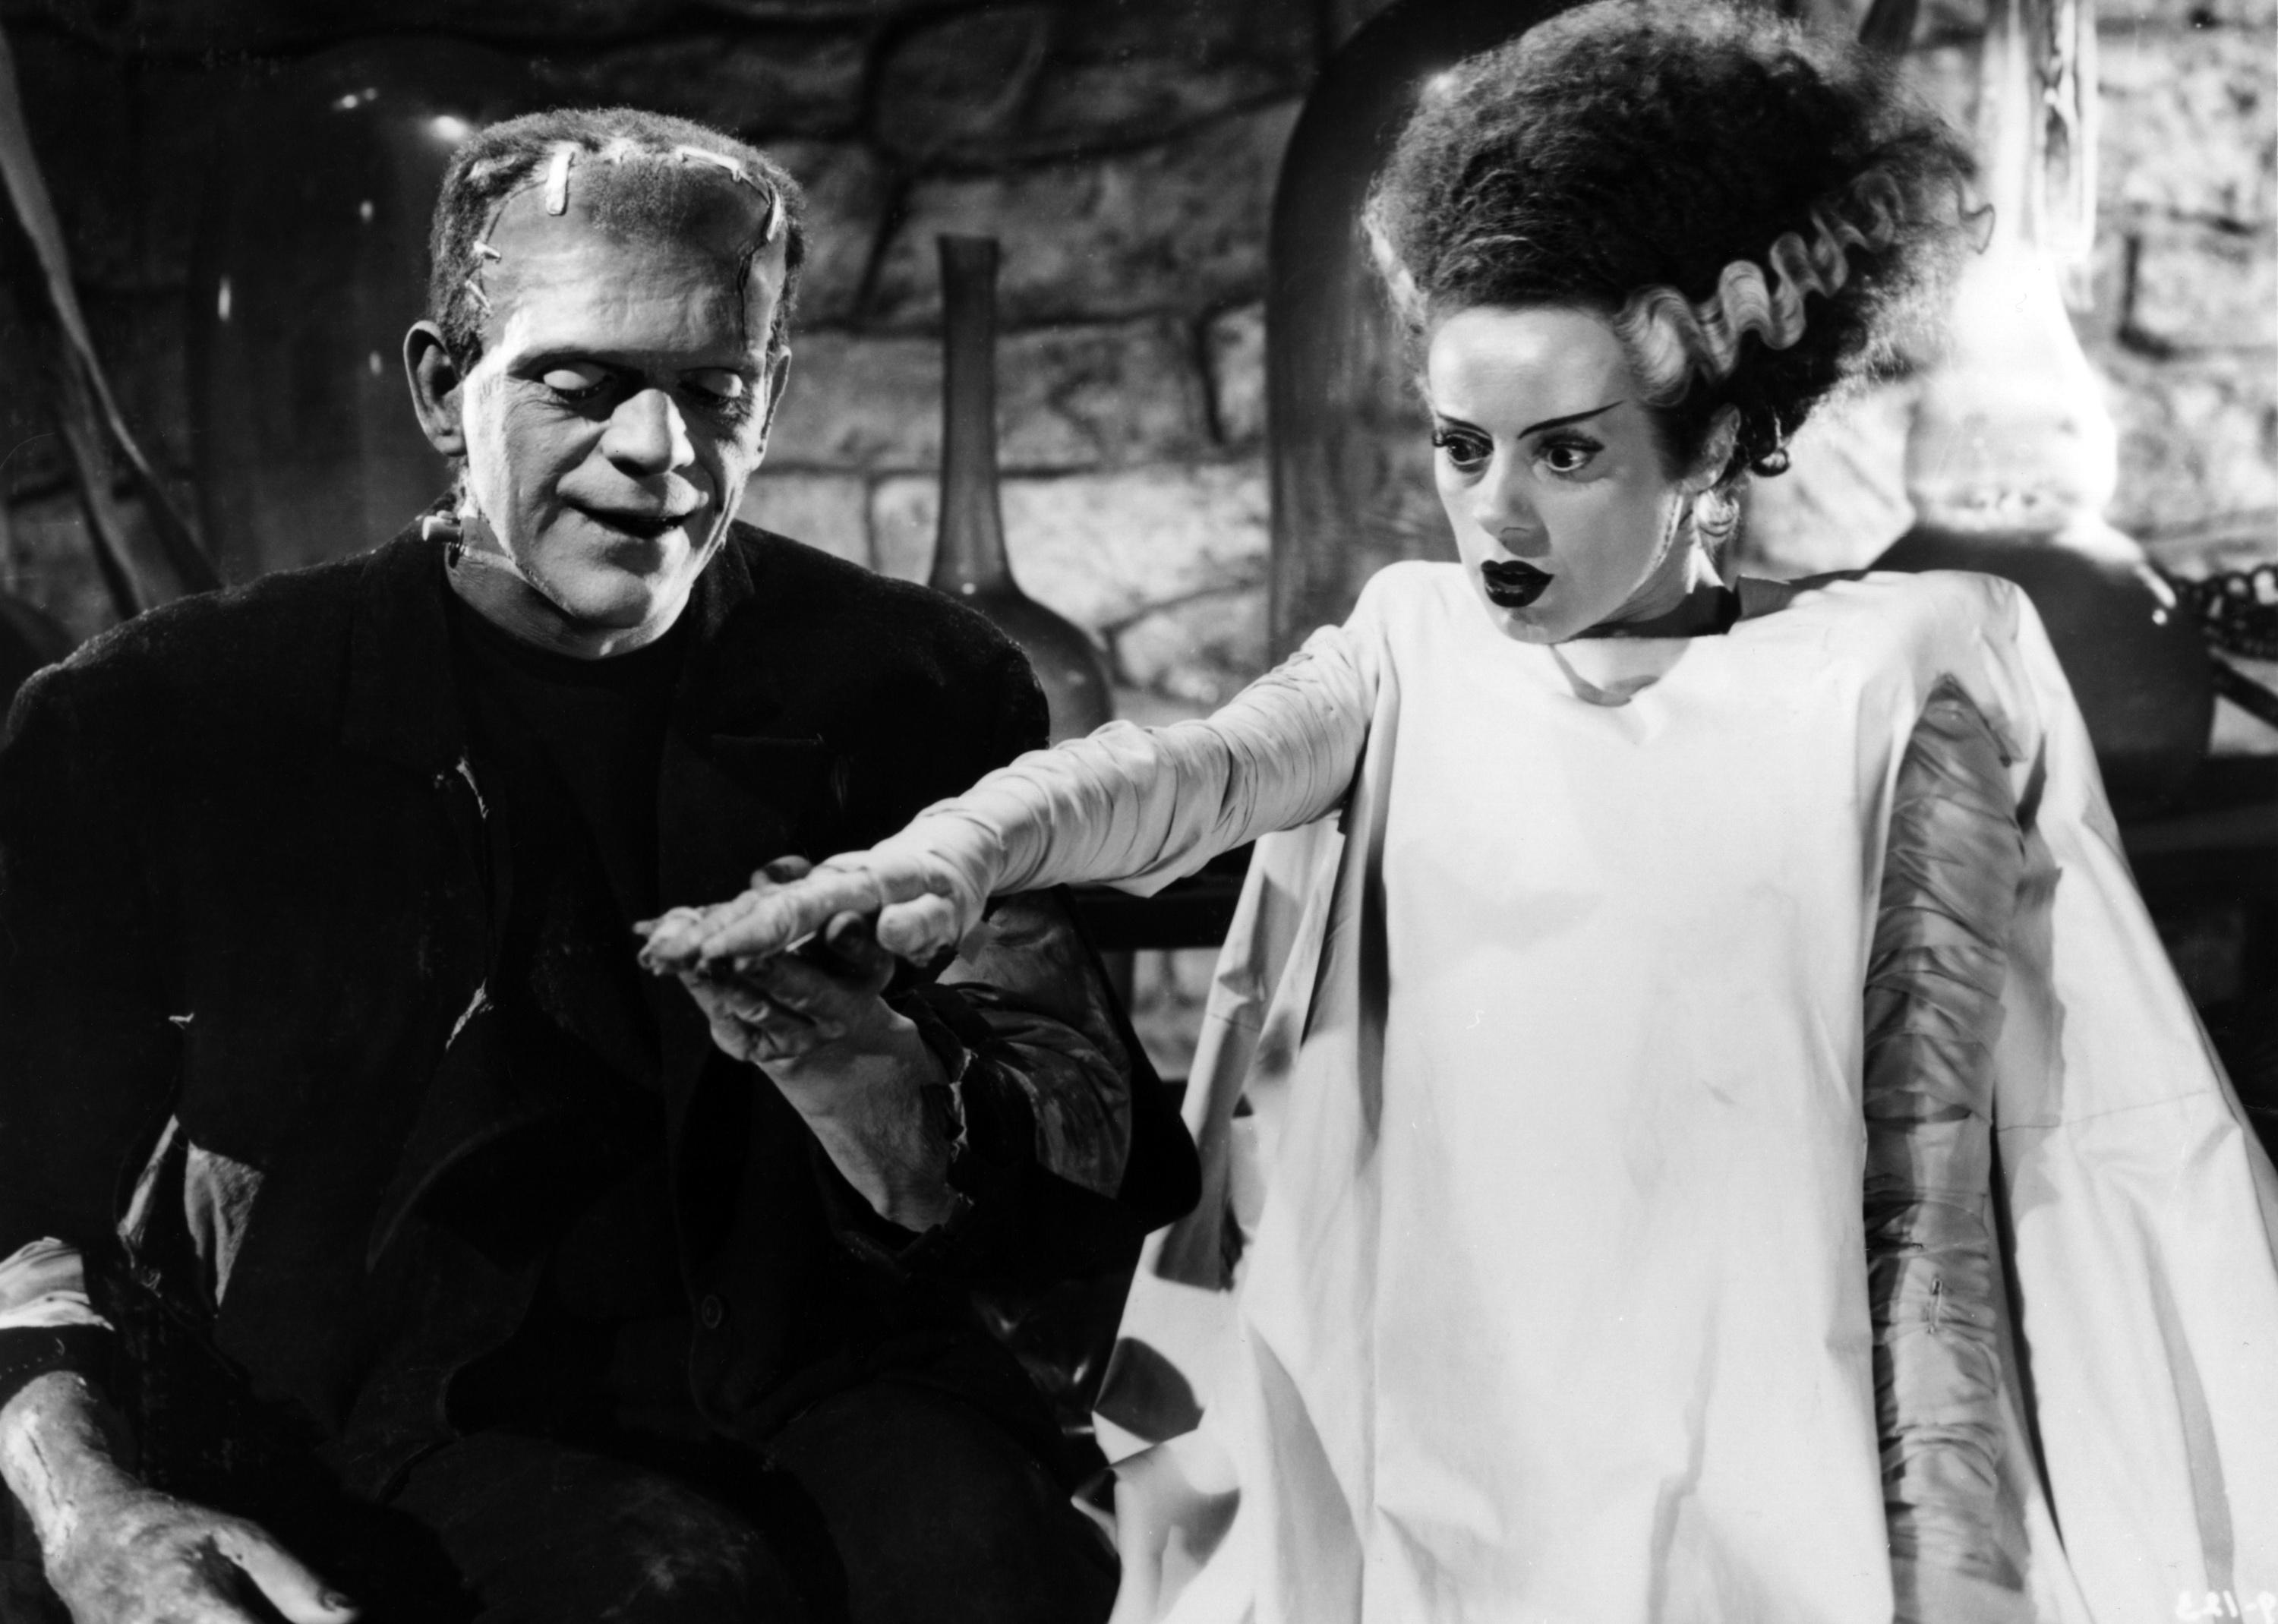 Actors Boris Karloff and Elsa Lanchester in a scene from ‘The Bride of Frankenstein.'